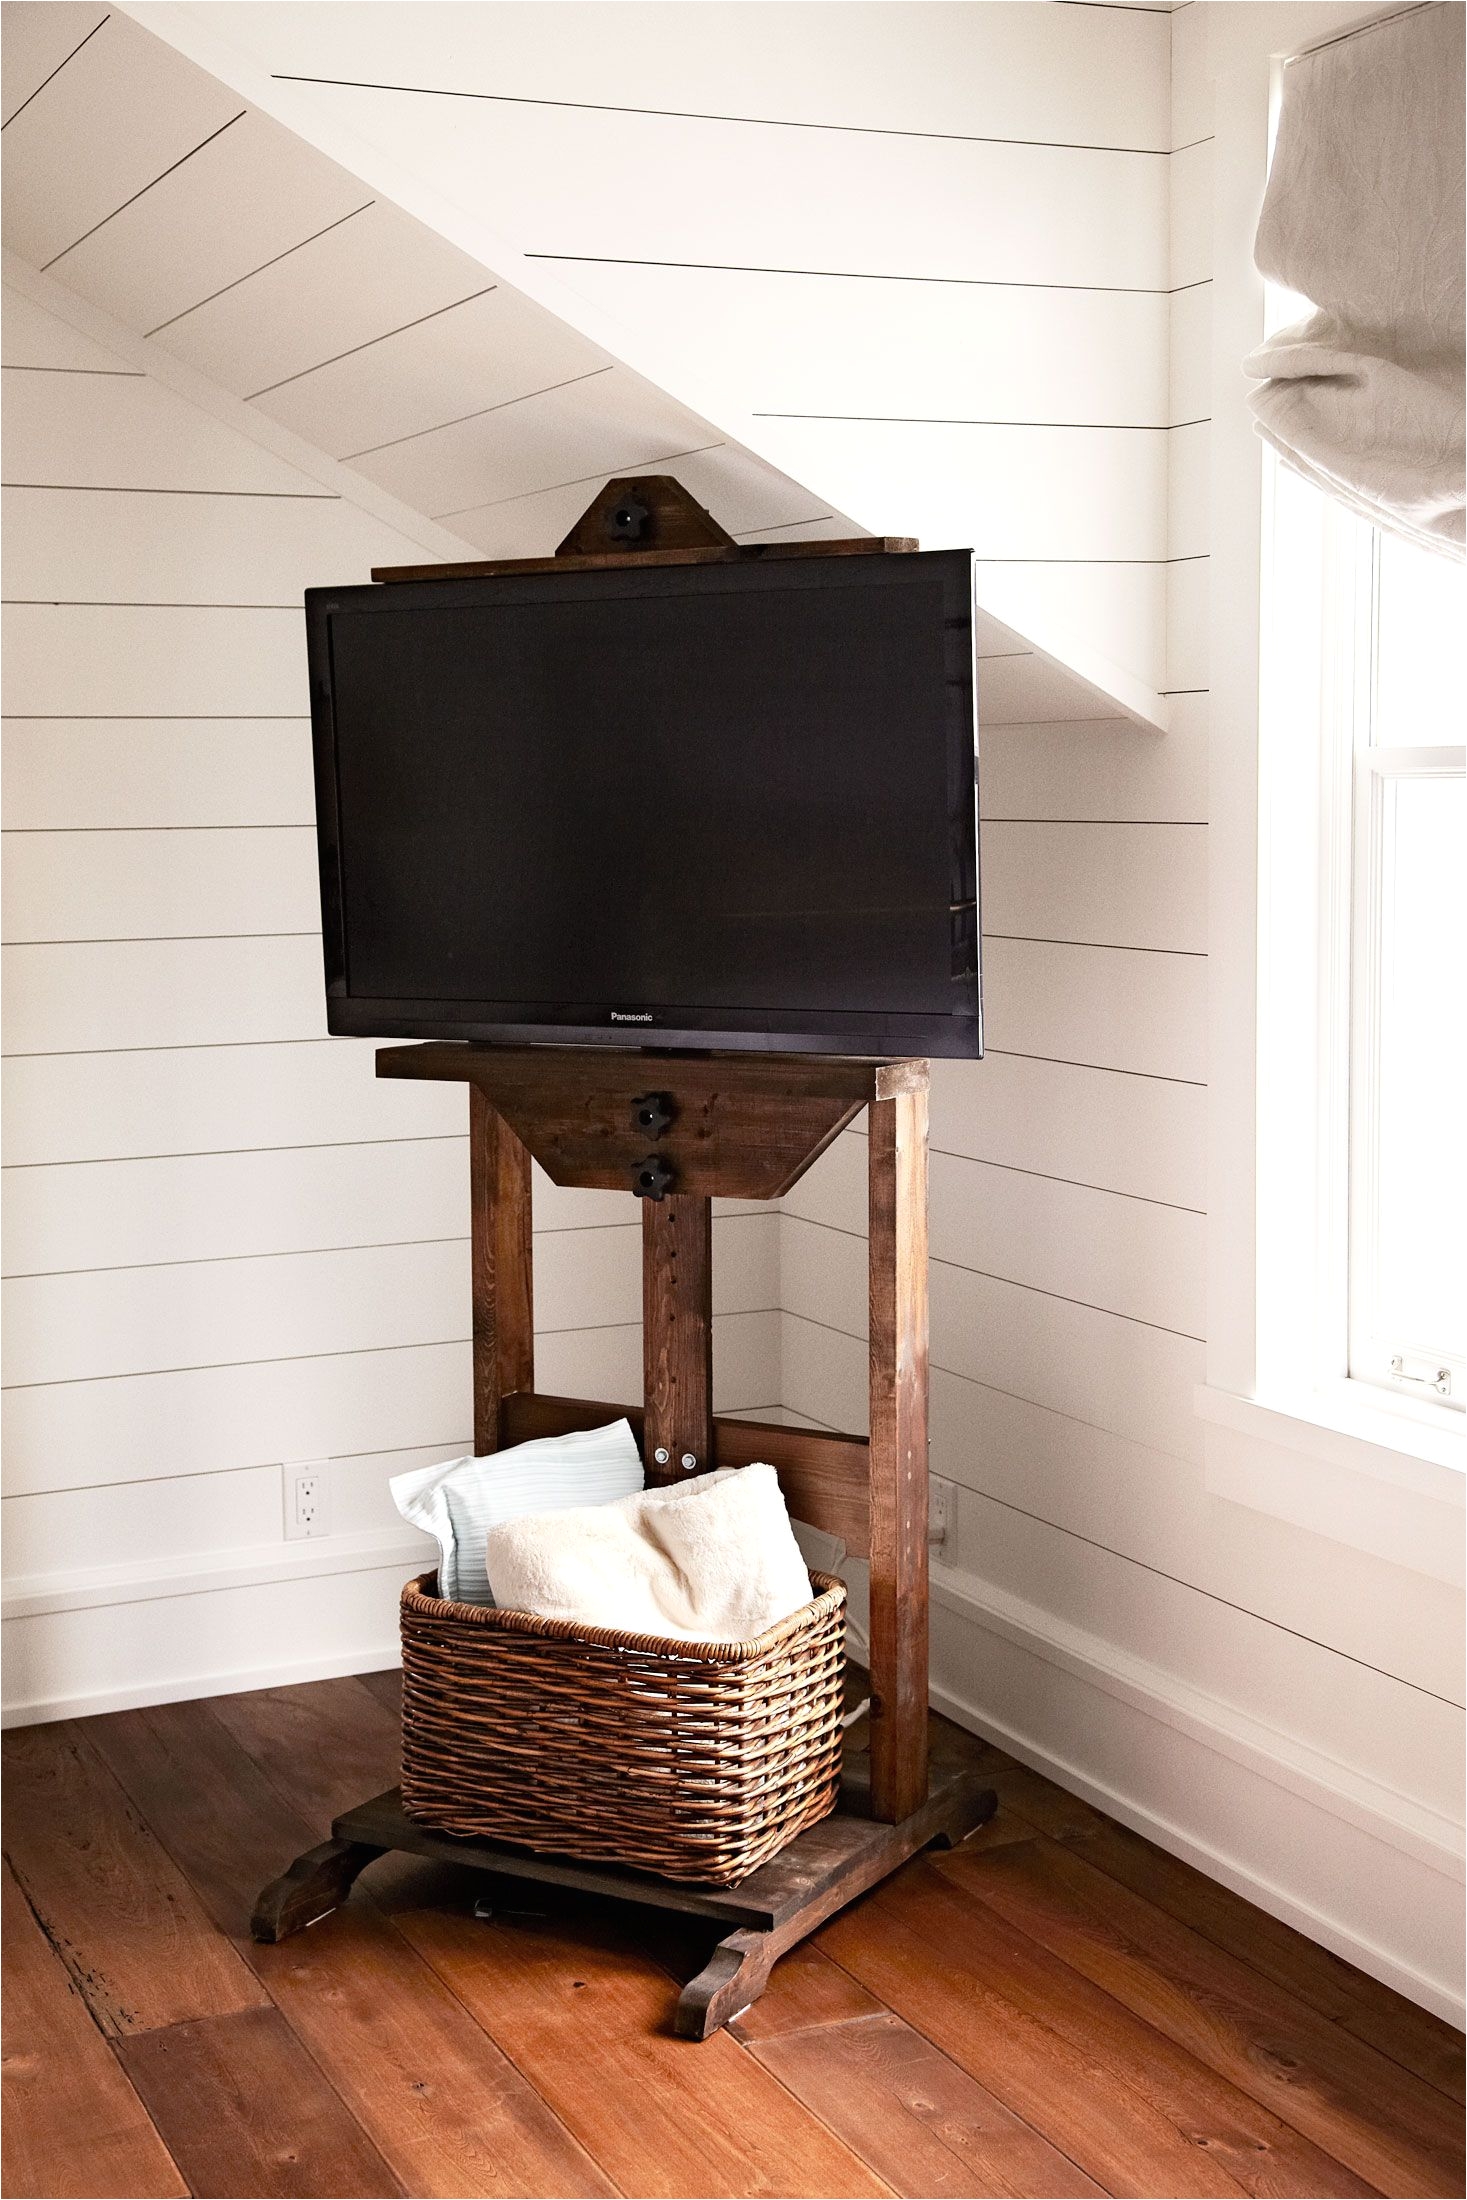 tv easel stand in corner hidden tv cables with restoration hardware easel and wicker basket